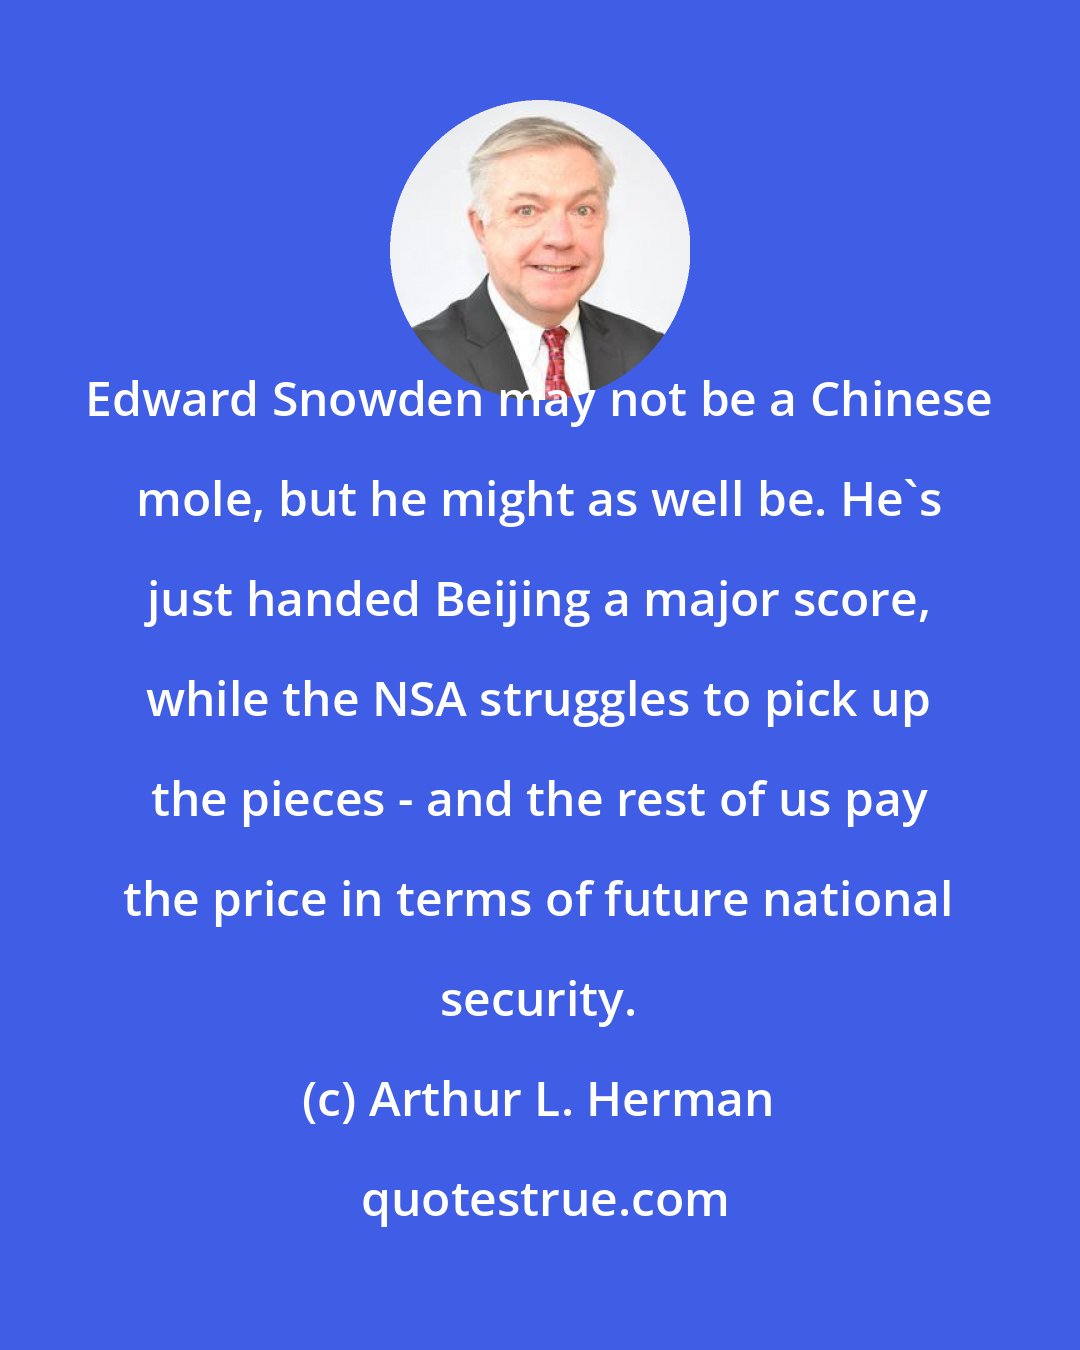 Arthur L. Herman: Edward Snowden may not be a Chinese mole, but he might as well be. He's just handed Beijing a major score, while the NSA struggles to pick up the pieces - and the rest of us pay the price in terms of future national security.